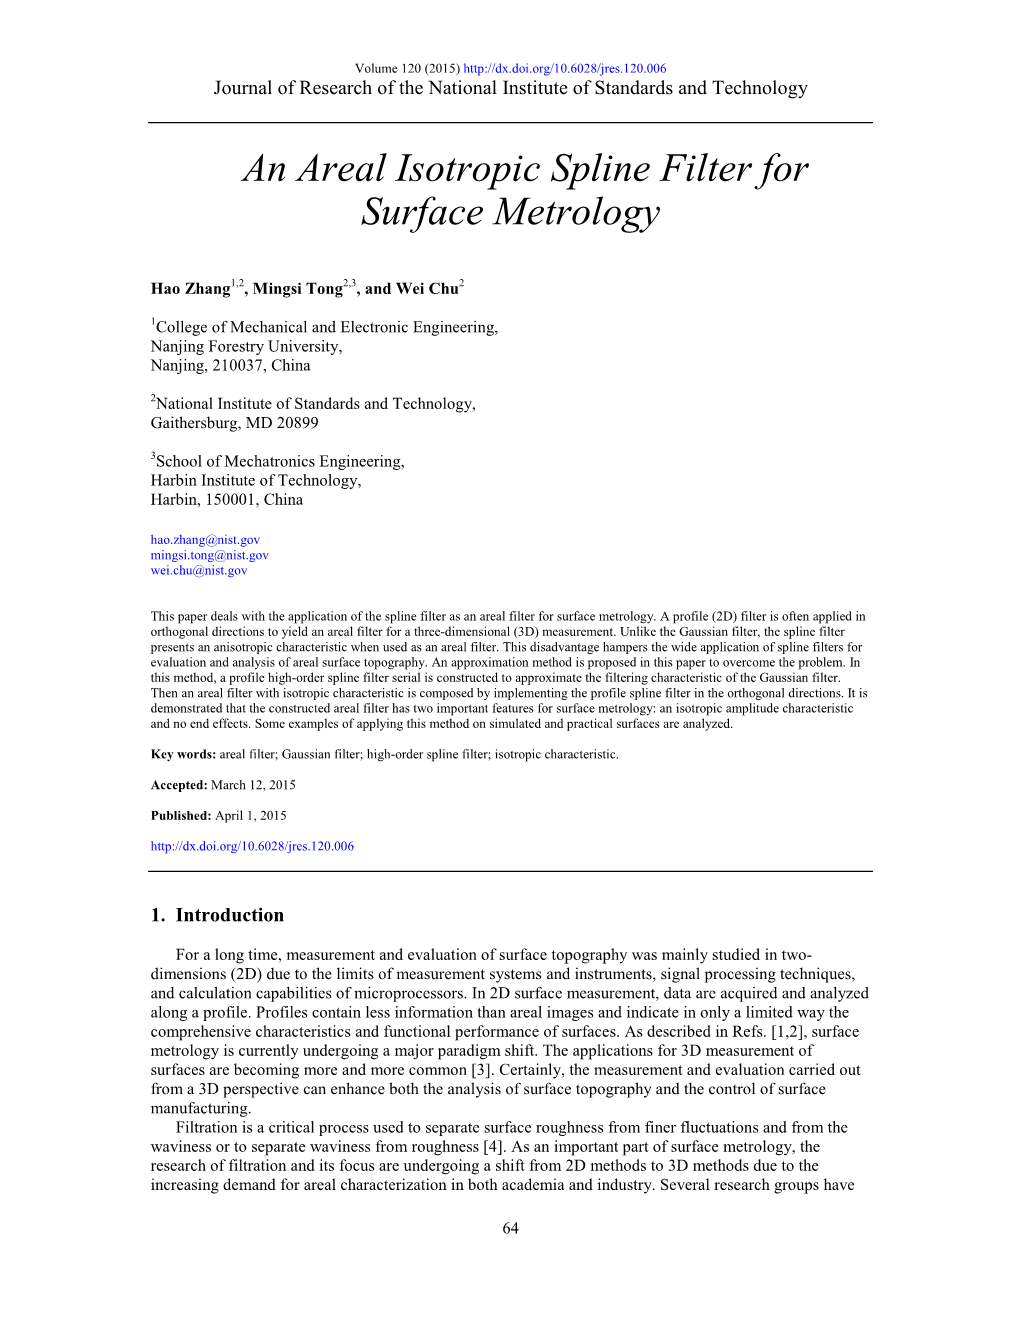 An Areal Isotropic Spline Filter for Surface Metrology